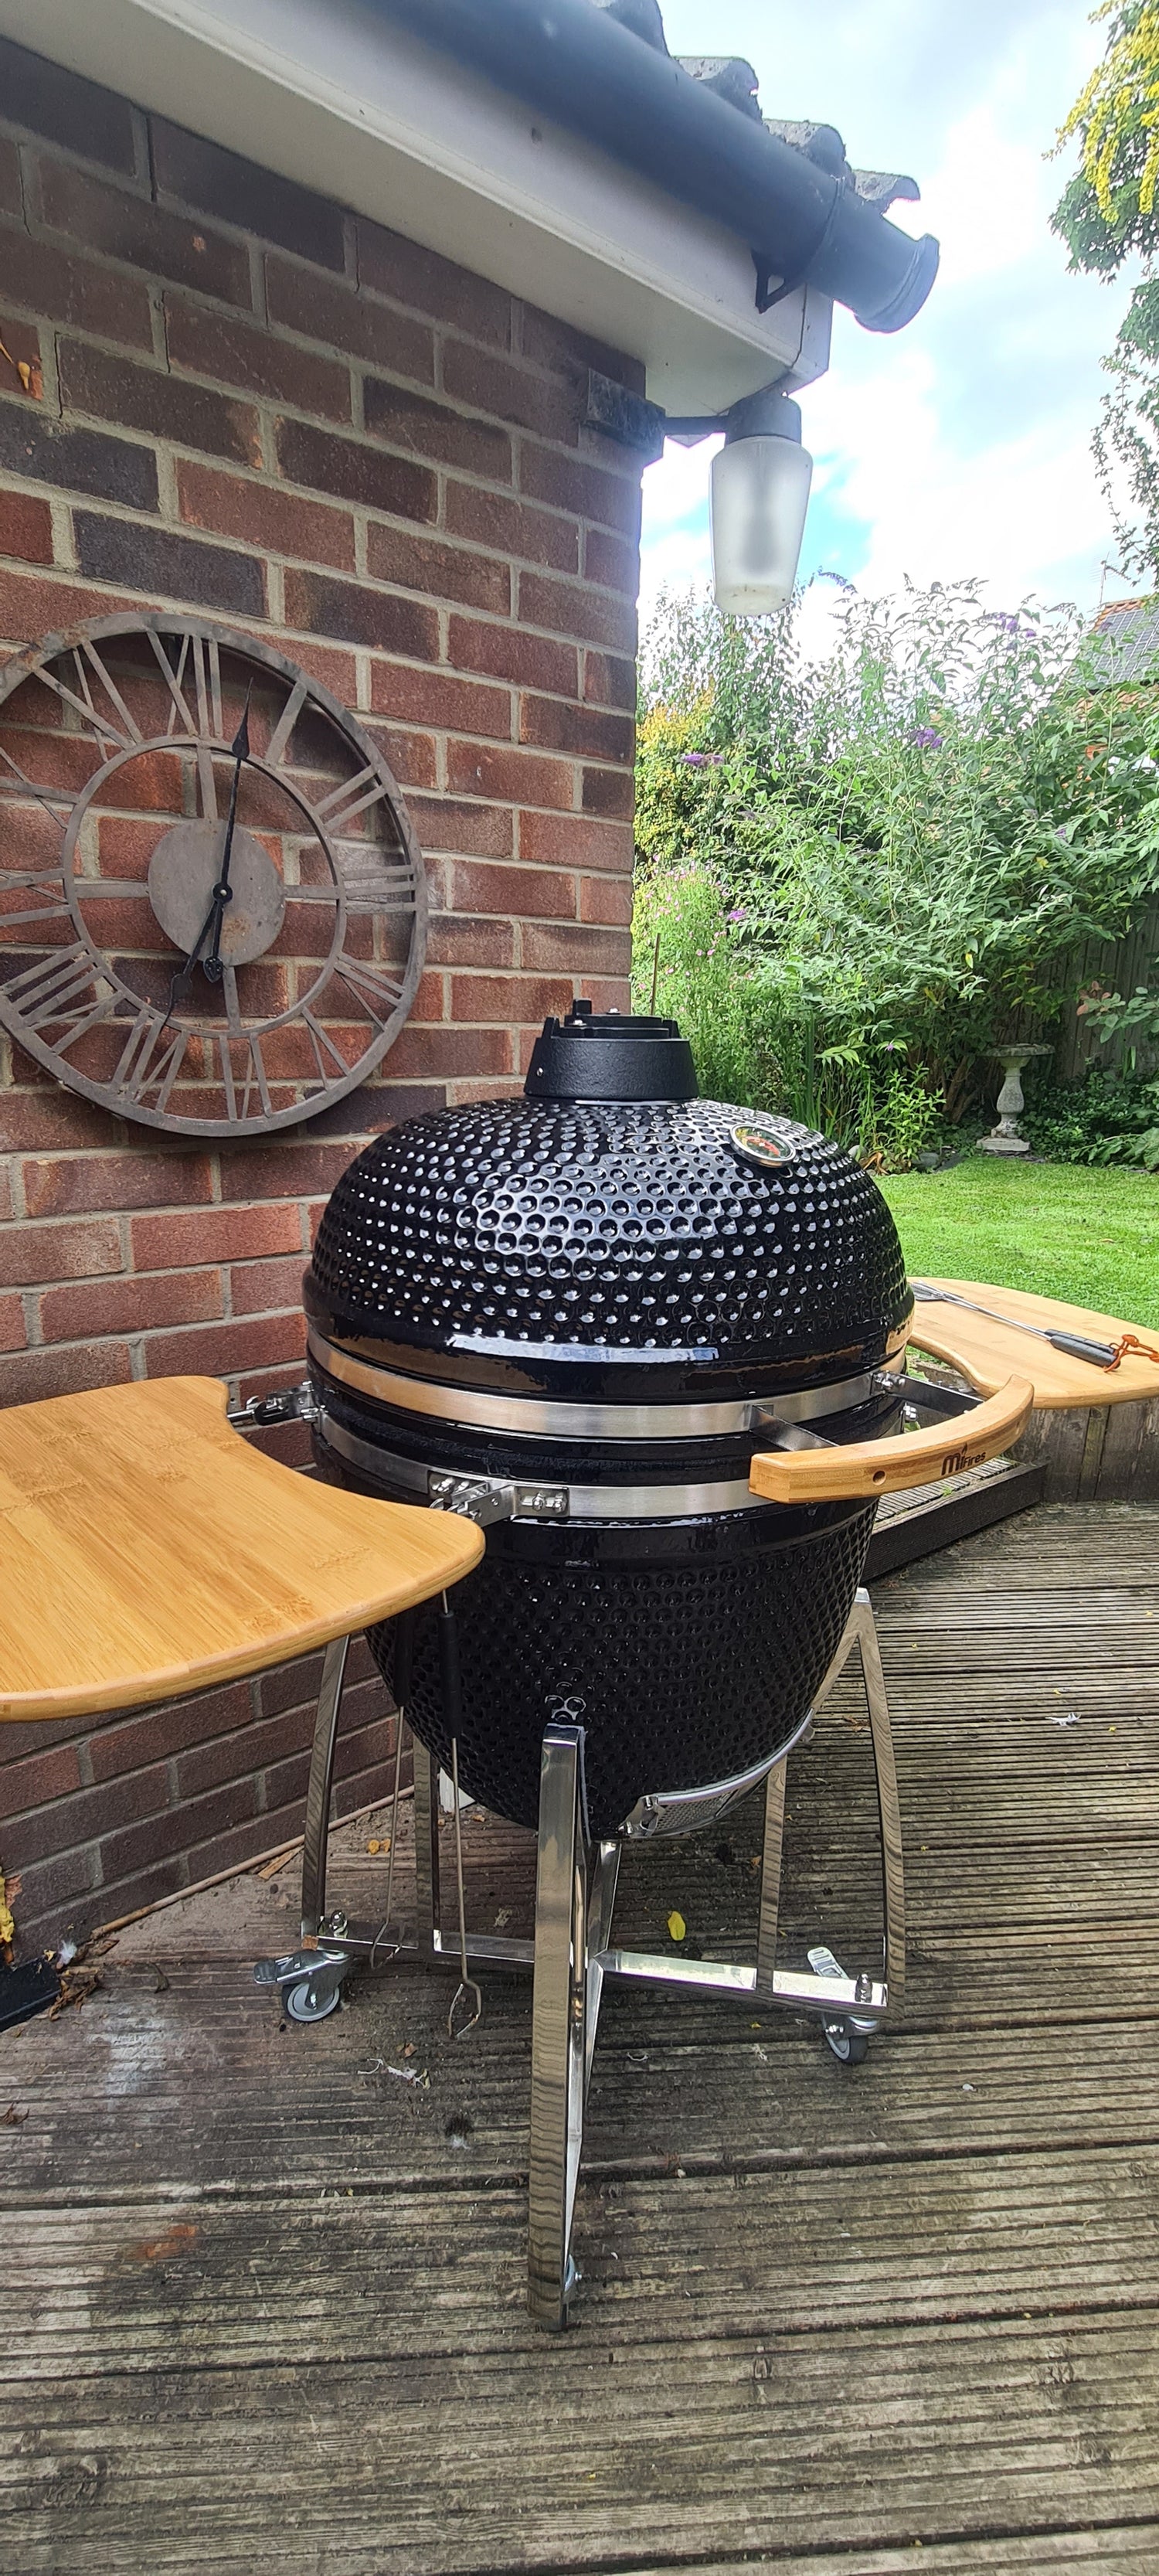 A black 23" Kamado grill with chrome stand.